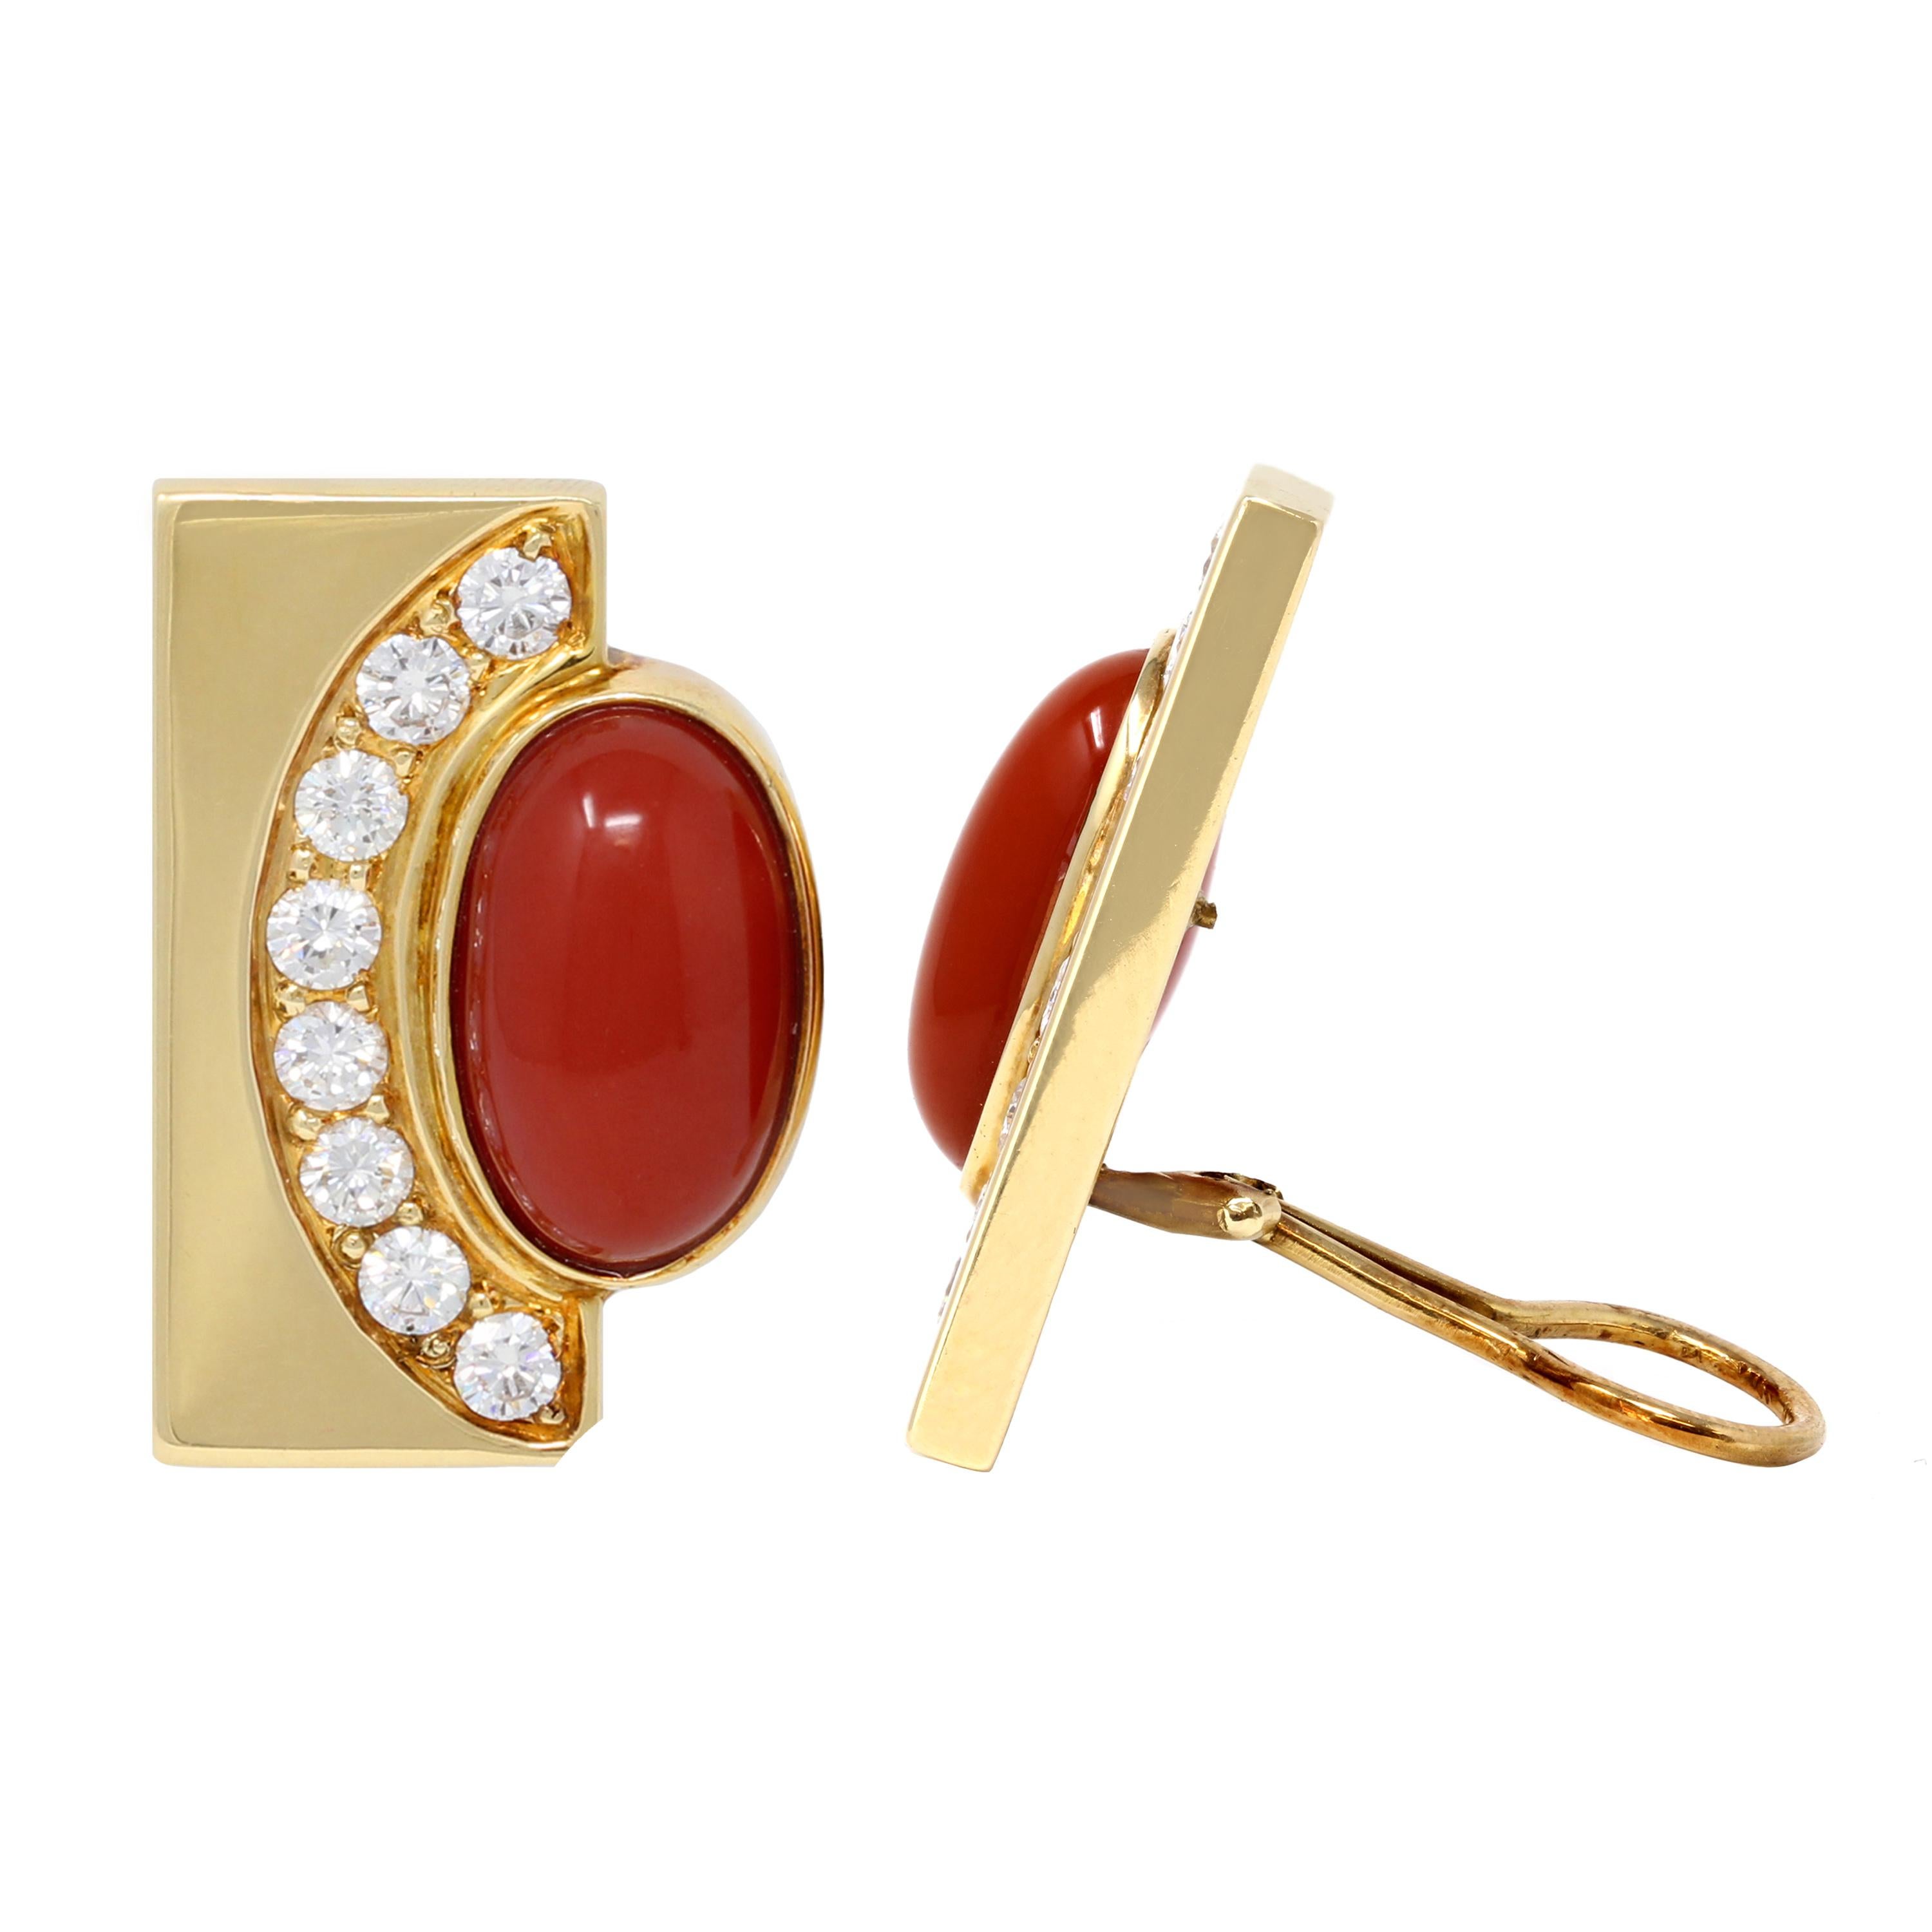 Of geometric styling set with two cabochon corals, half framed by round diamonds weighing approximately 3.00 carats, within polished gold half frames, gross weight 23.7 grams, measuring 1¼ by ⅞ inches.